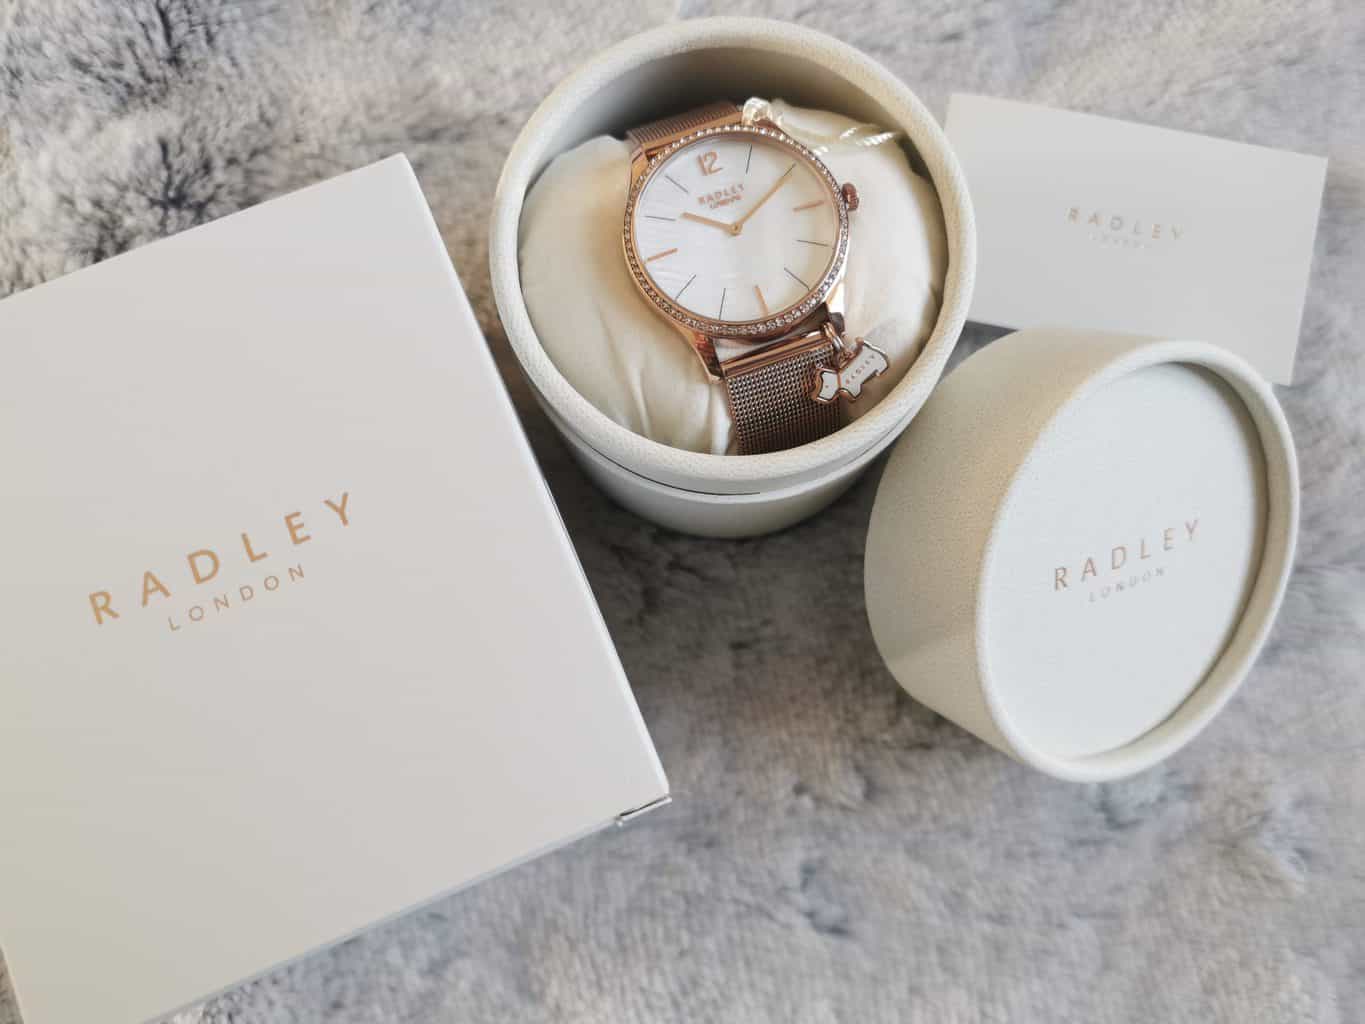 Gift a Radley Watch with Watches2U